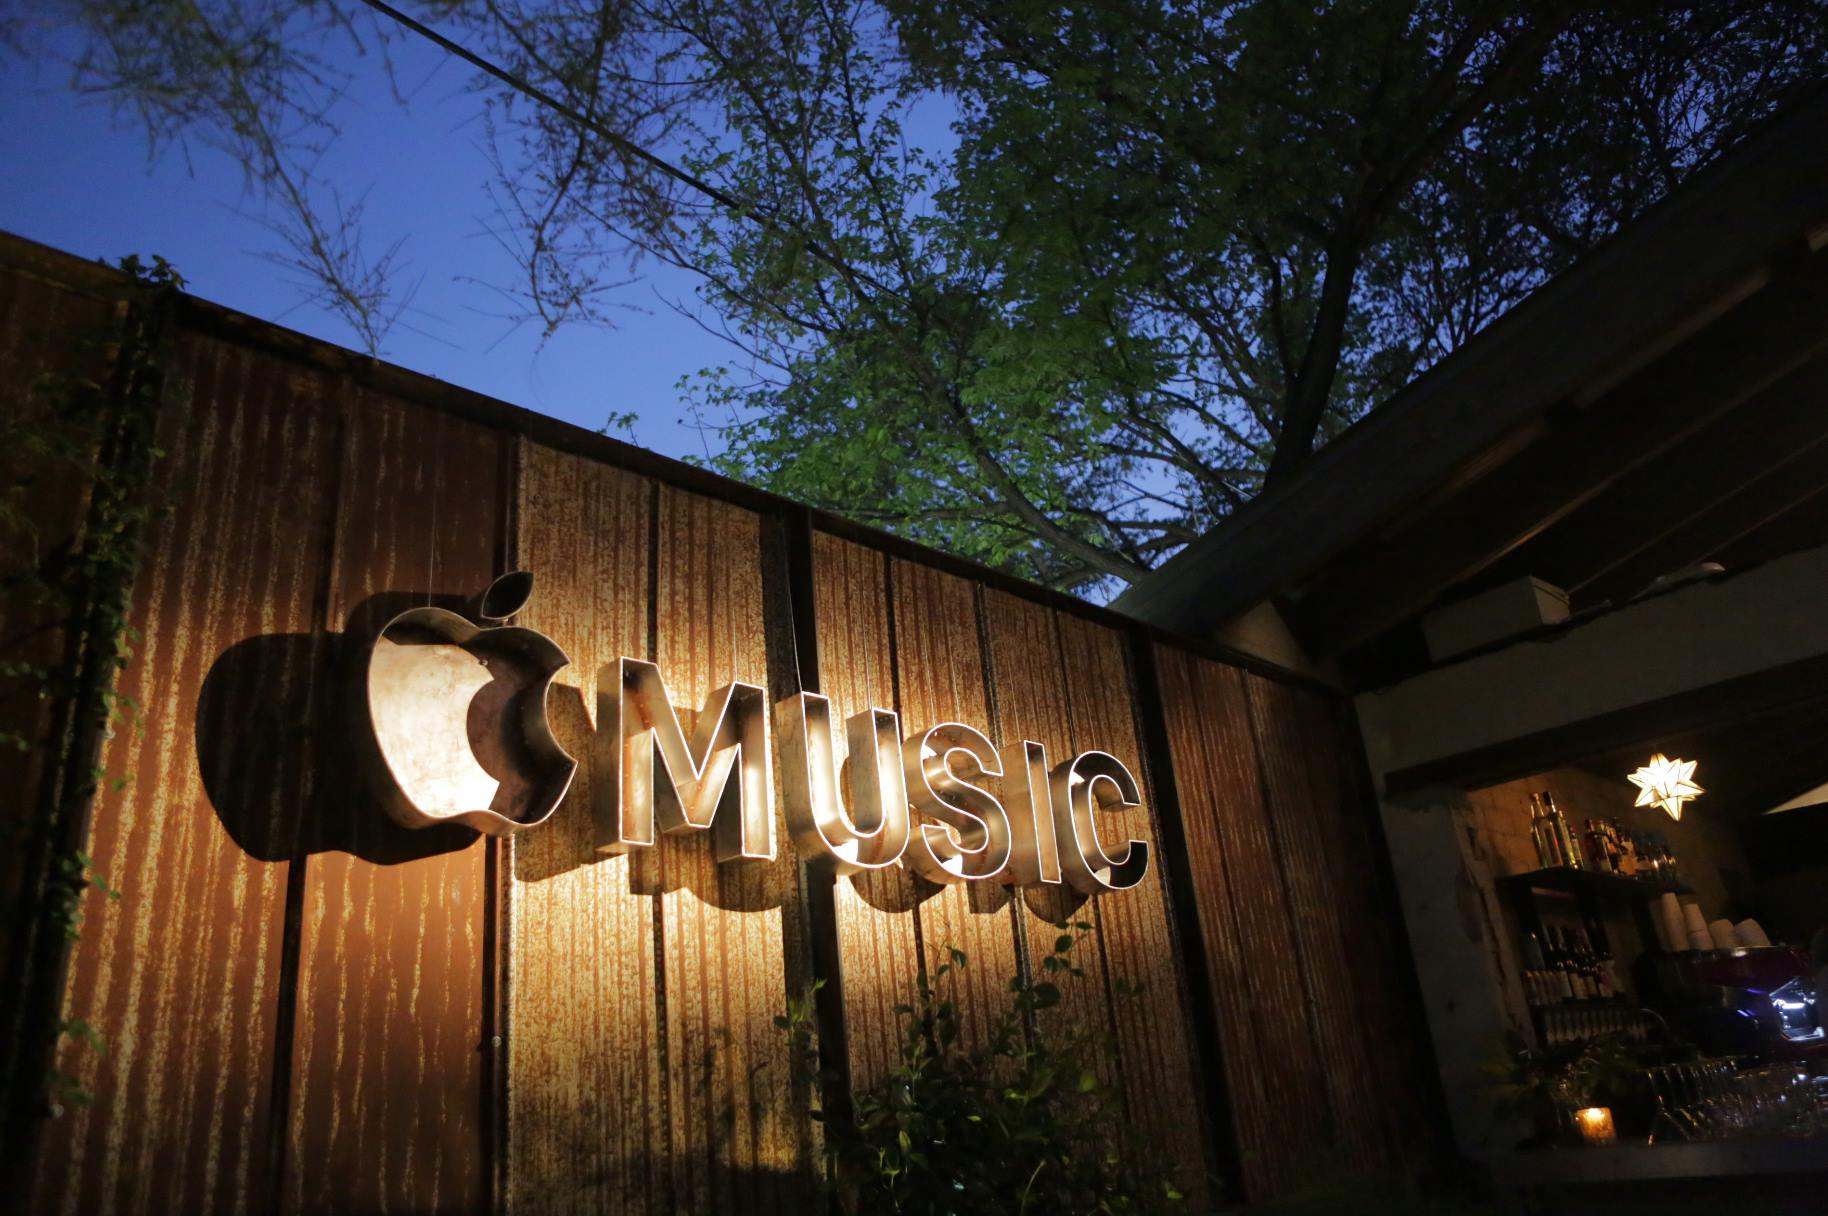 Apple Music’s “free trial” now costs 99 cents